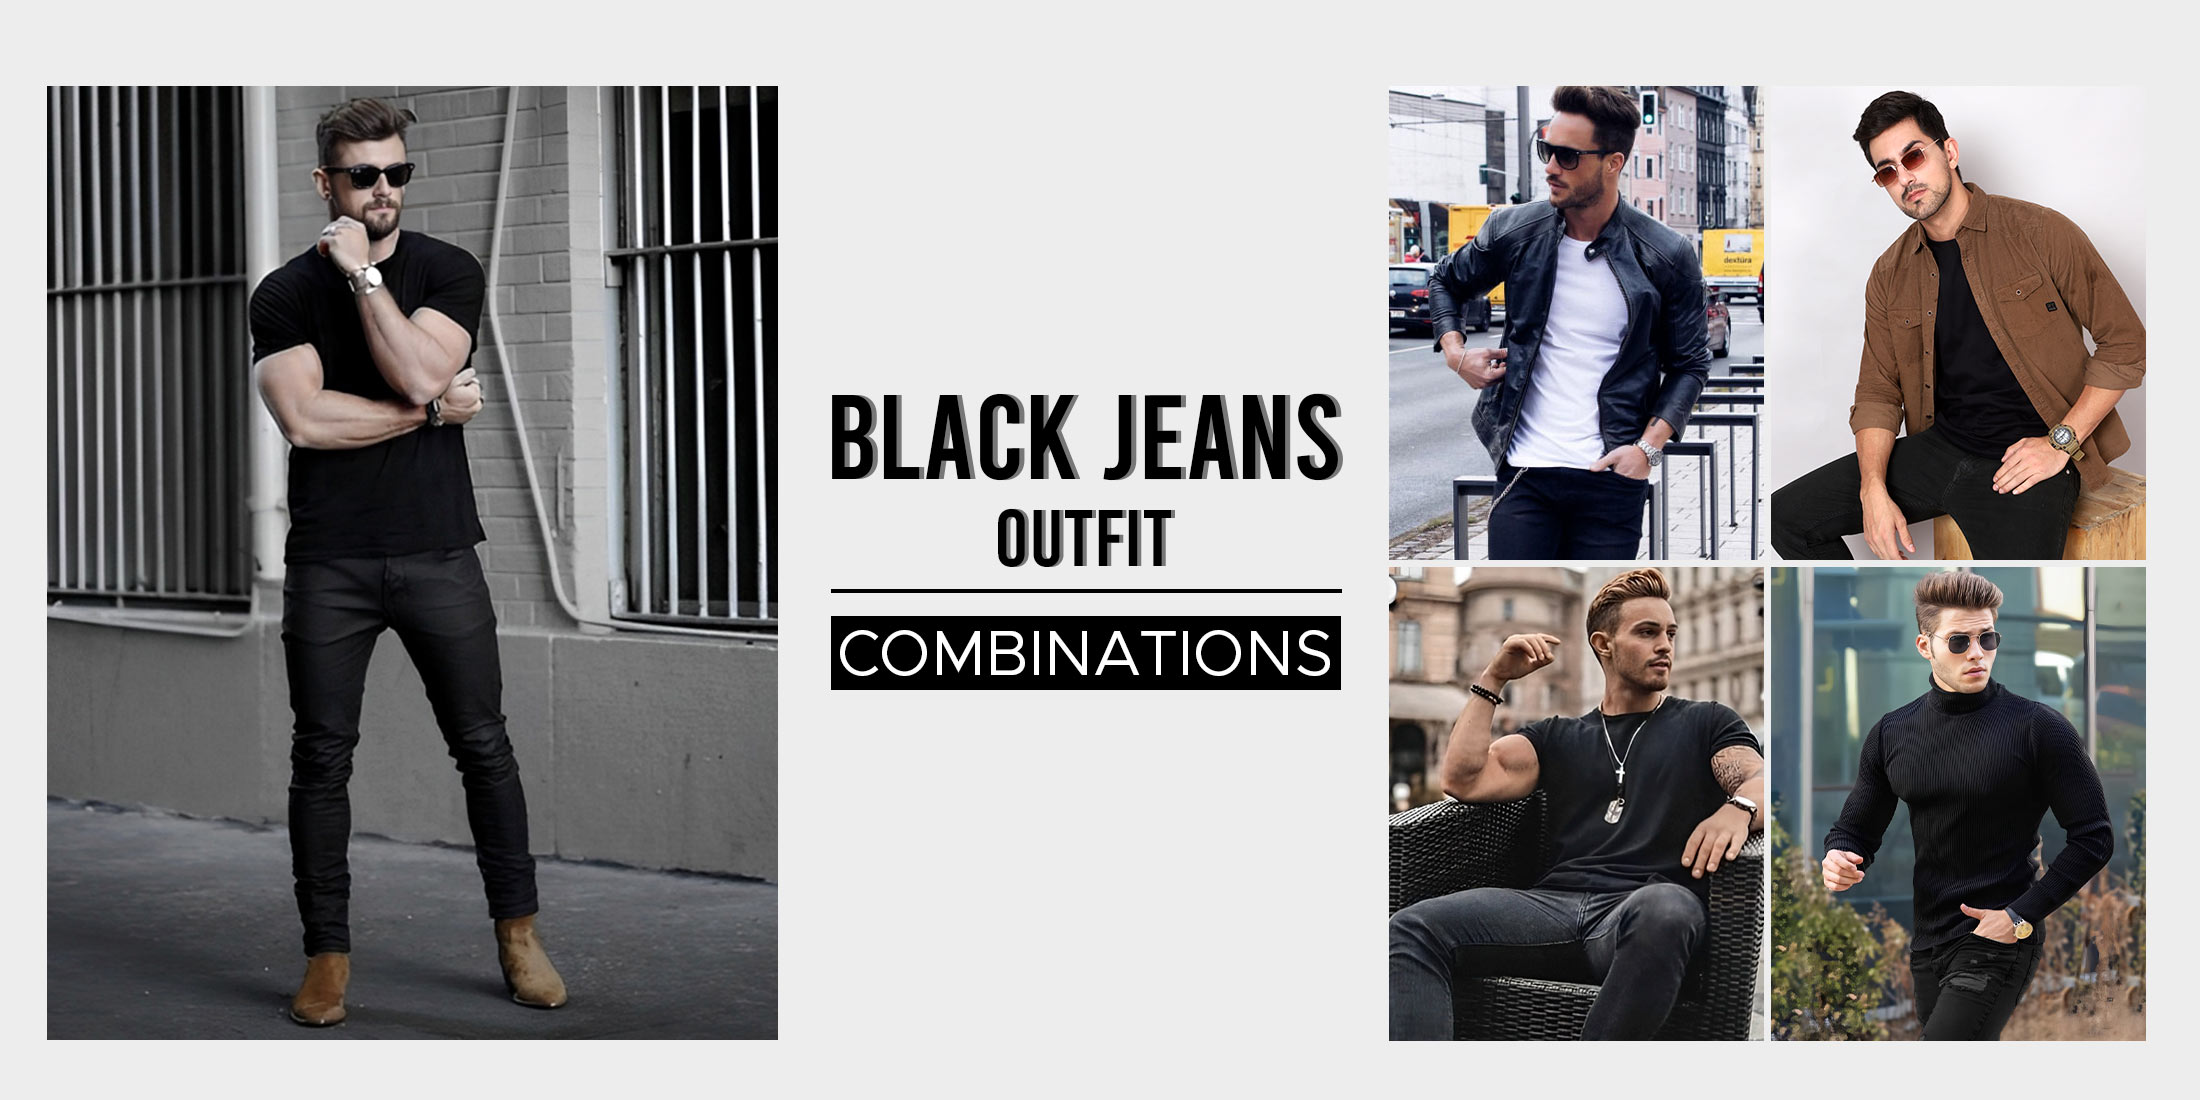 What To Wear With Black Jeans - 20 Styling And Outfit Ideas